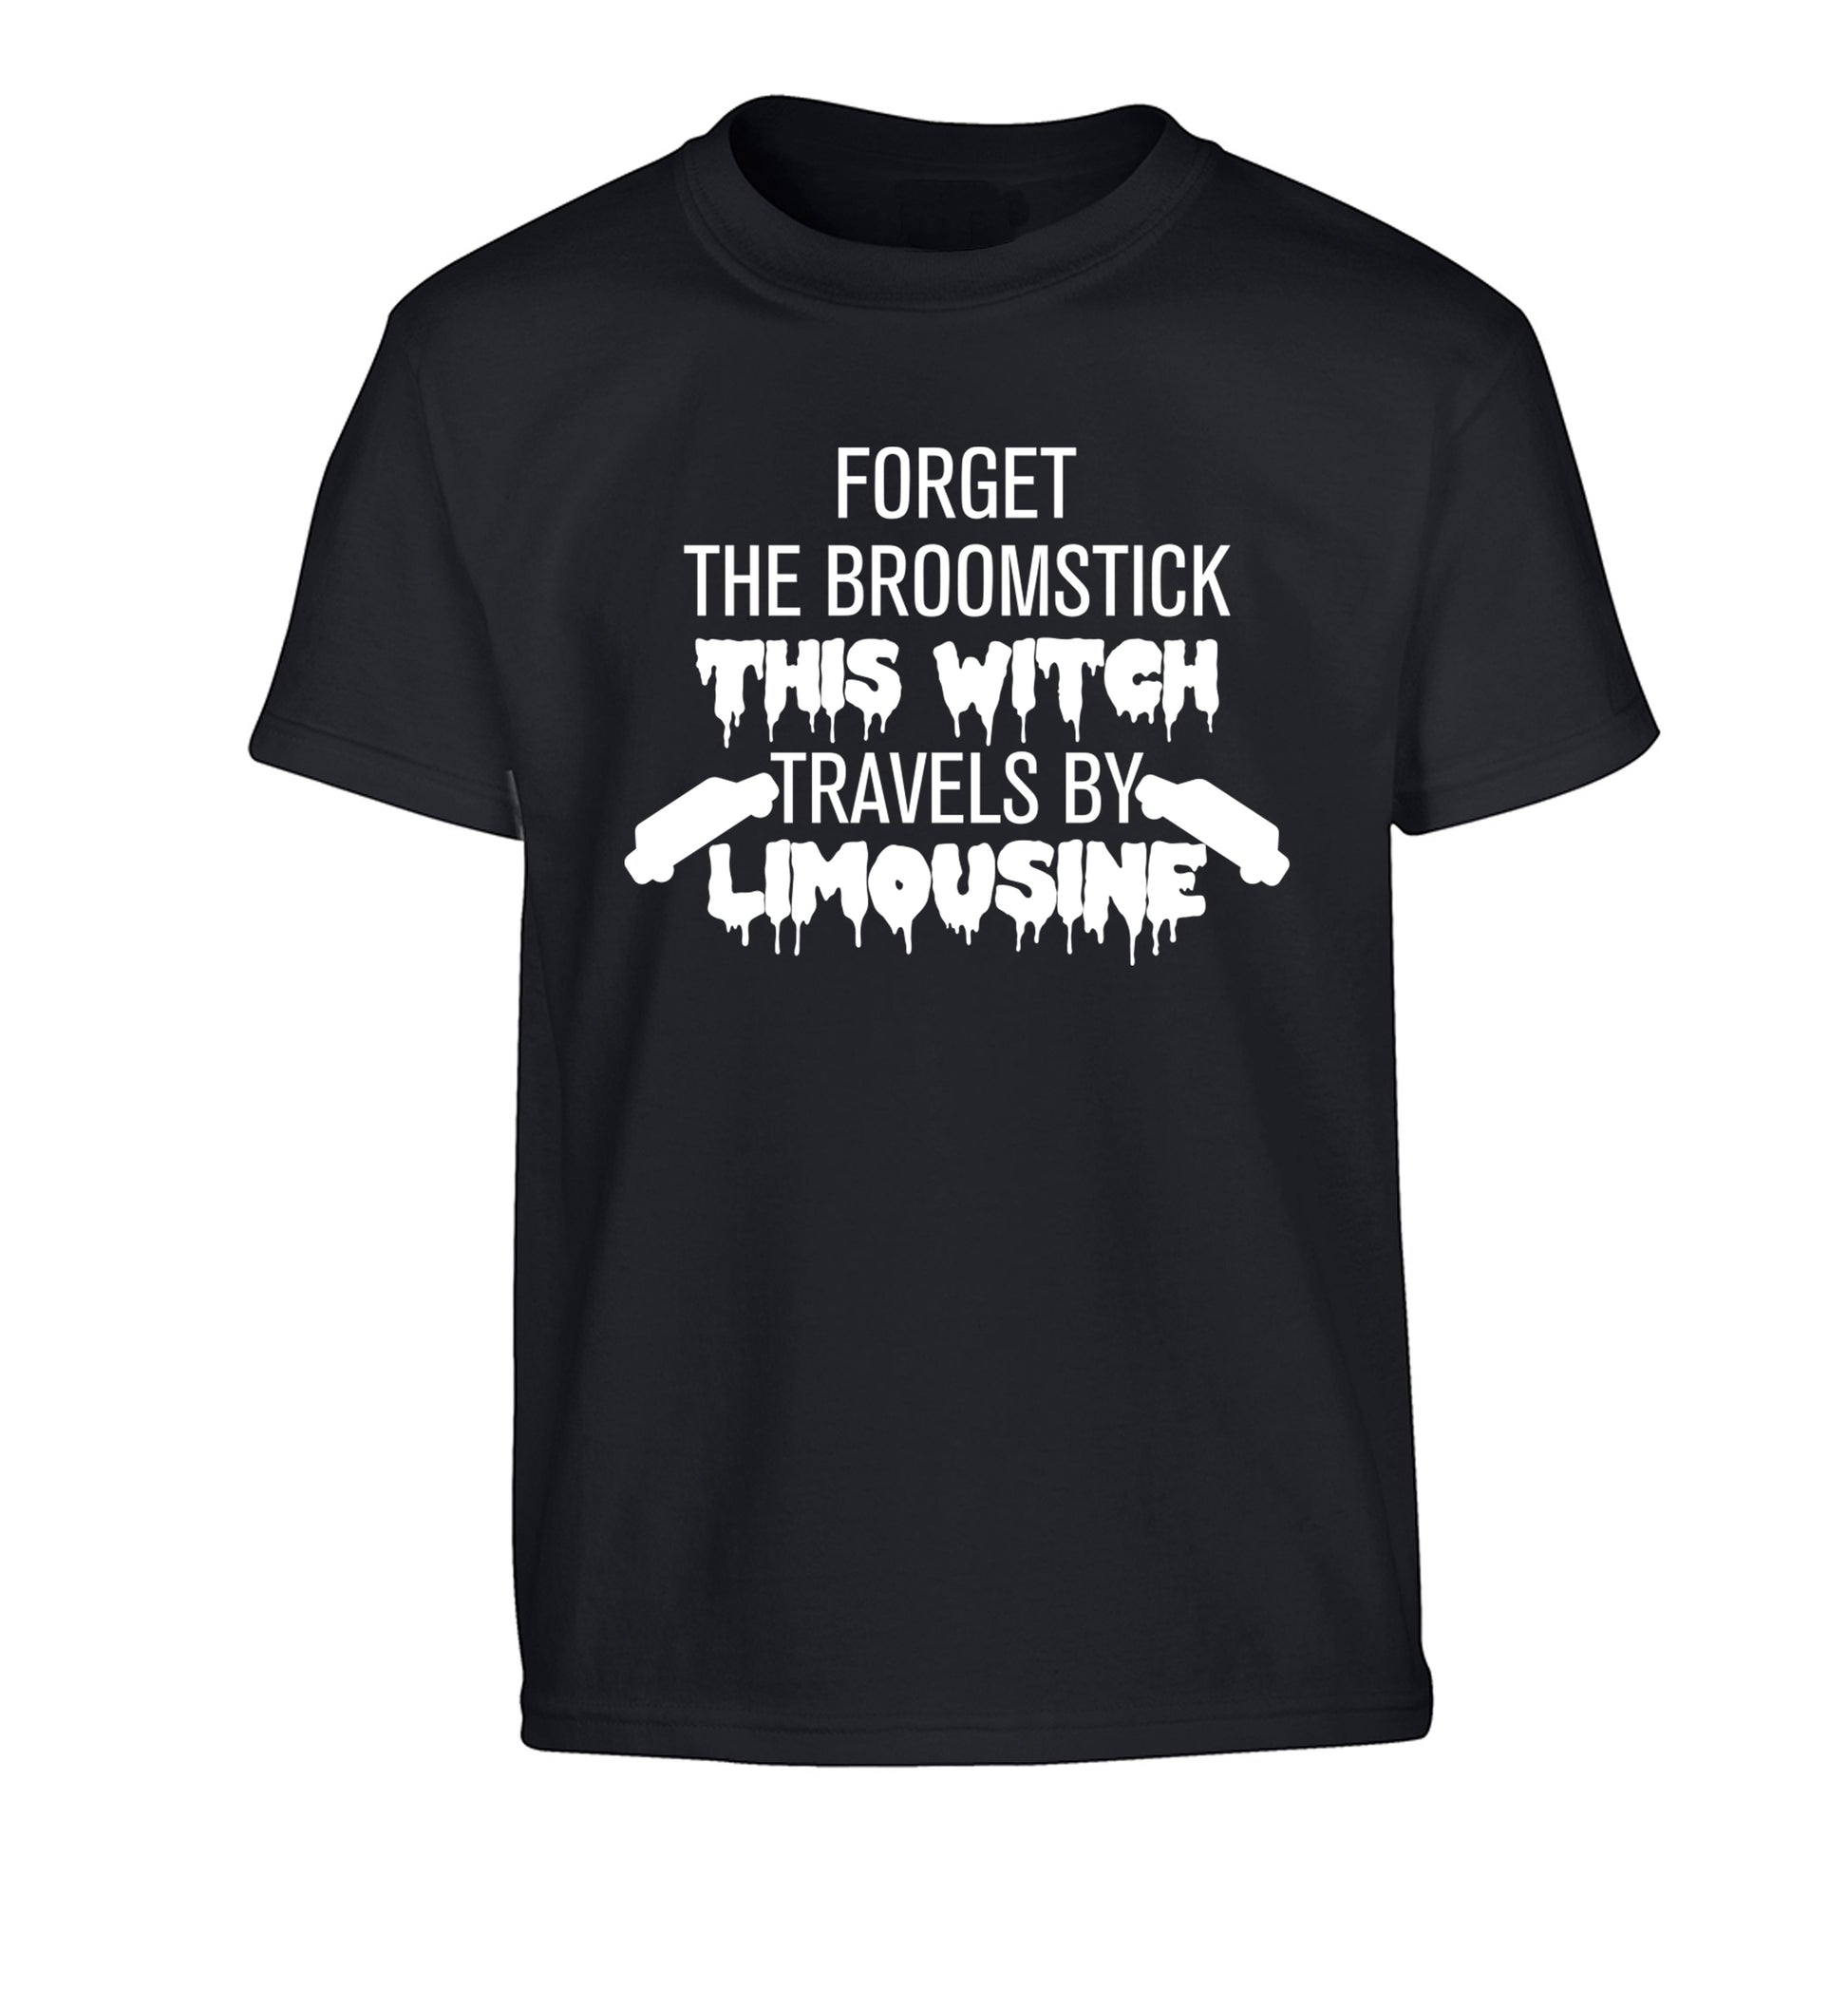 Forget the broomstick this witch travels by limousine Children's black Tshirt 12-14 Years